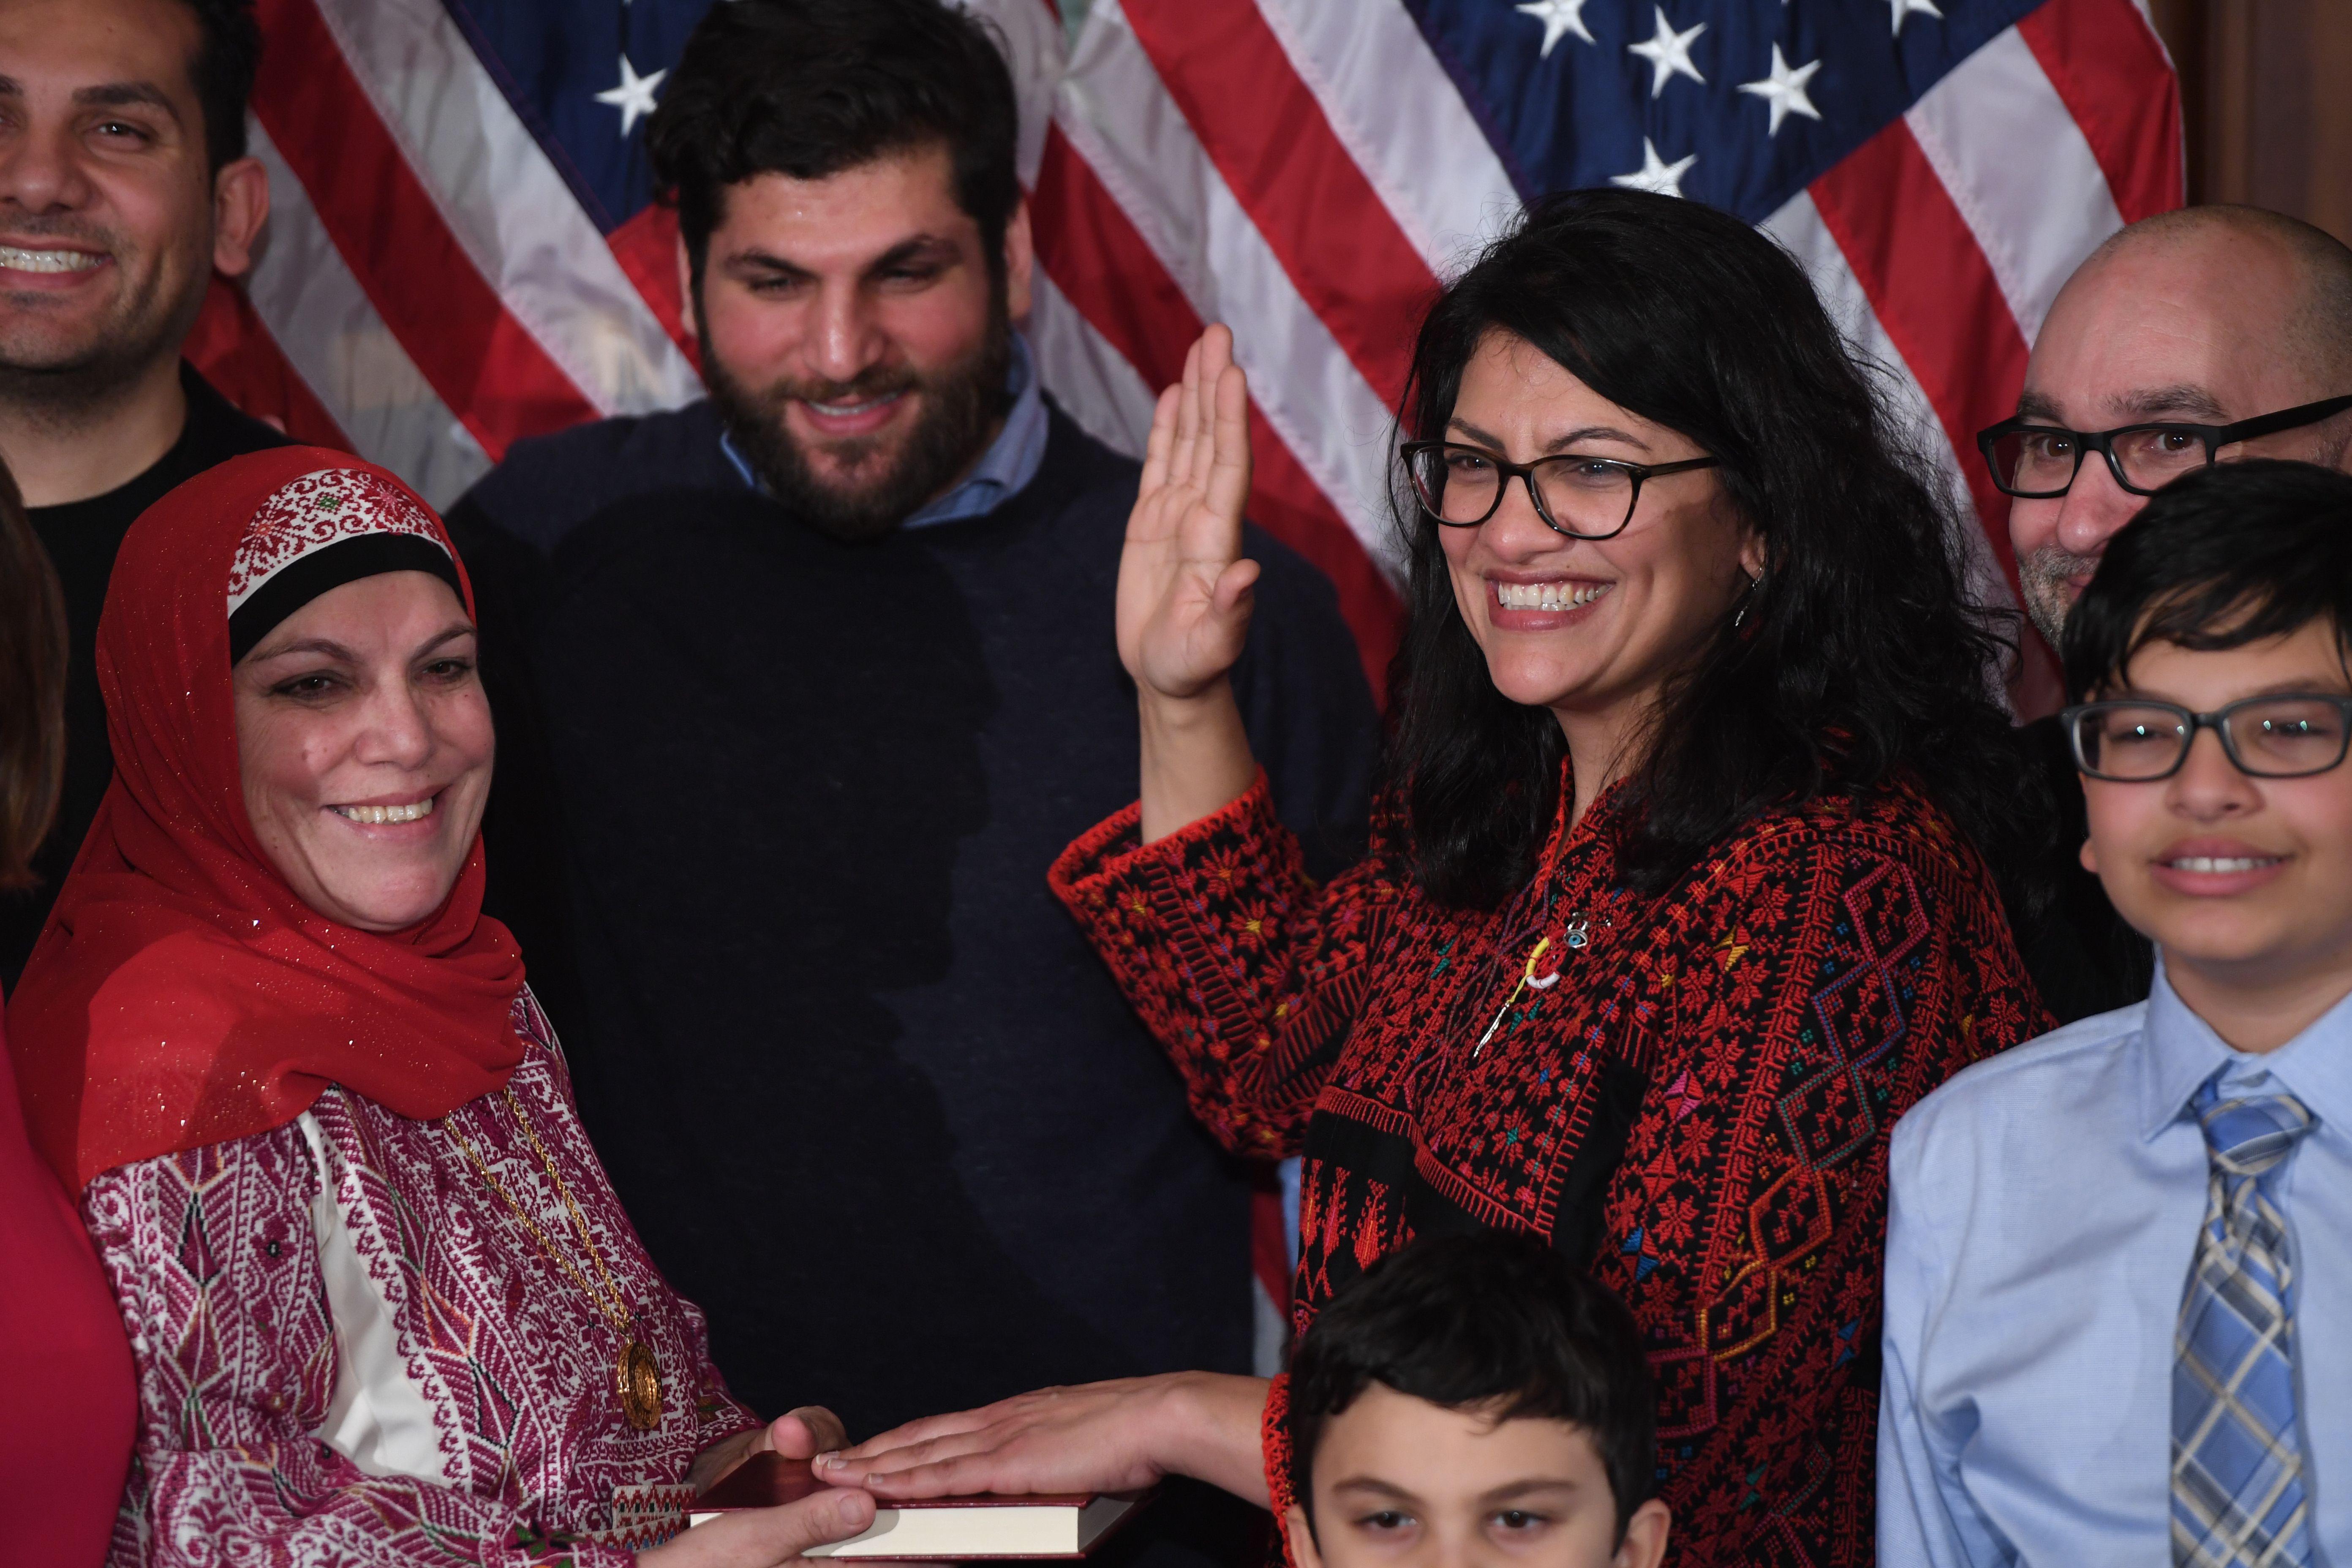 Rashida Tlaib, surrounded by family members, raises her hand to take the oath of office.